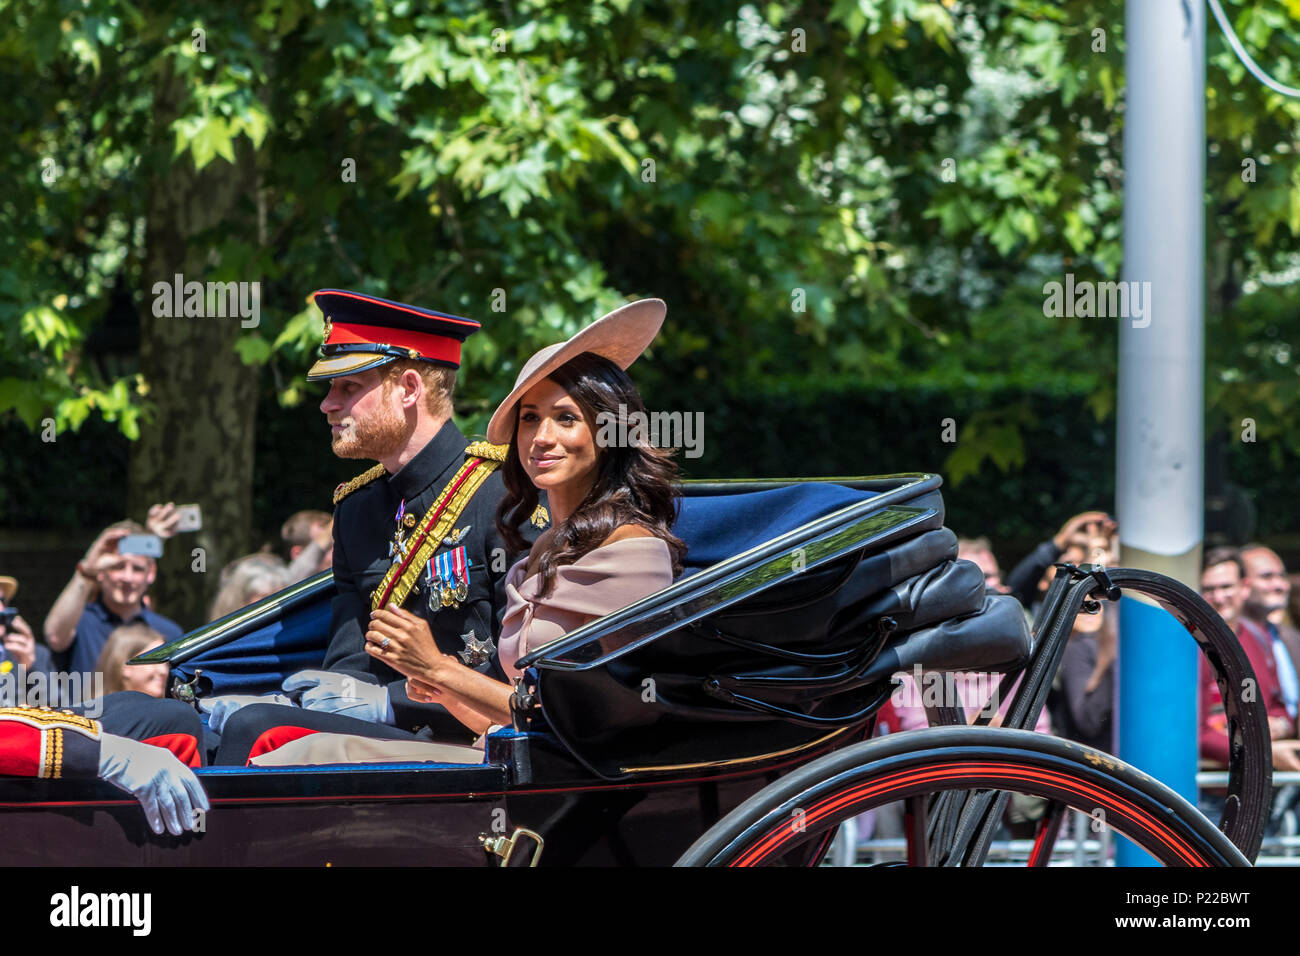 Prince Harry, The Duke of Sussex and Meghan Markle, The Duchess Of Sussex, ride together in a carriage at The Trooping Of The Colour  London,UK , 2018 Stock Photo